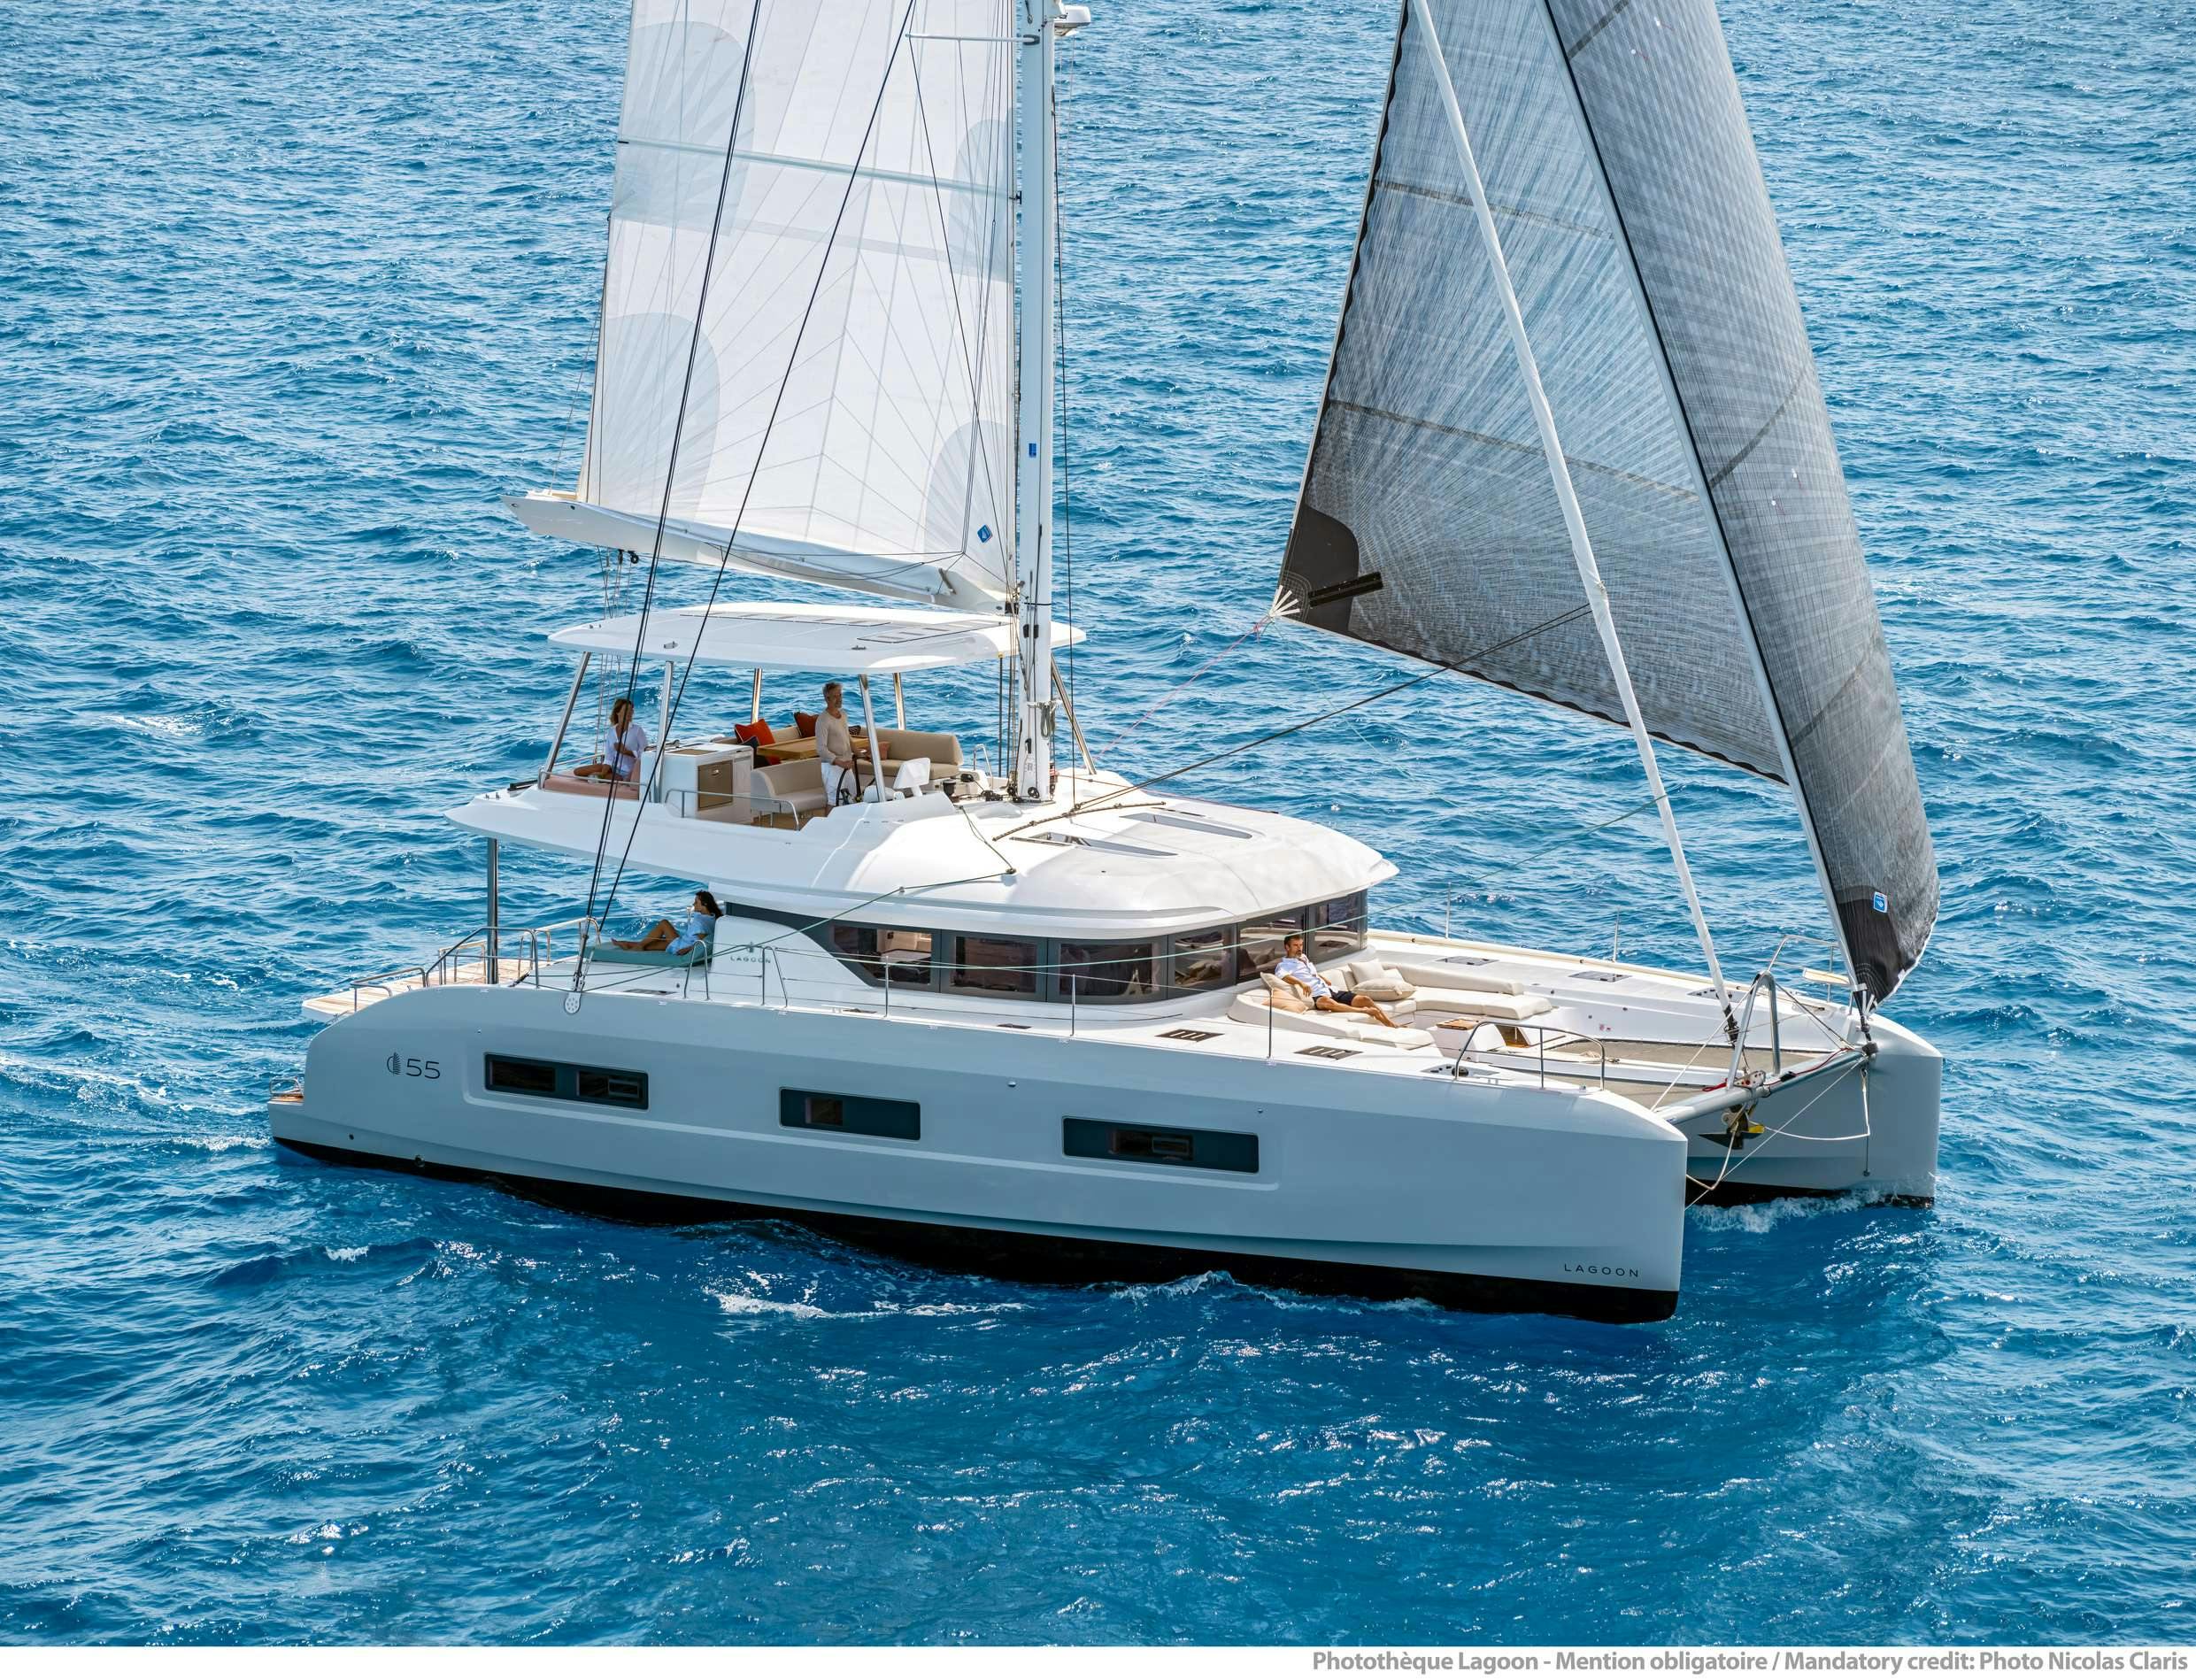 VALIUM 55 - Yacht Charter Cyclades & Boat hire in Greece 1